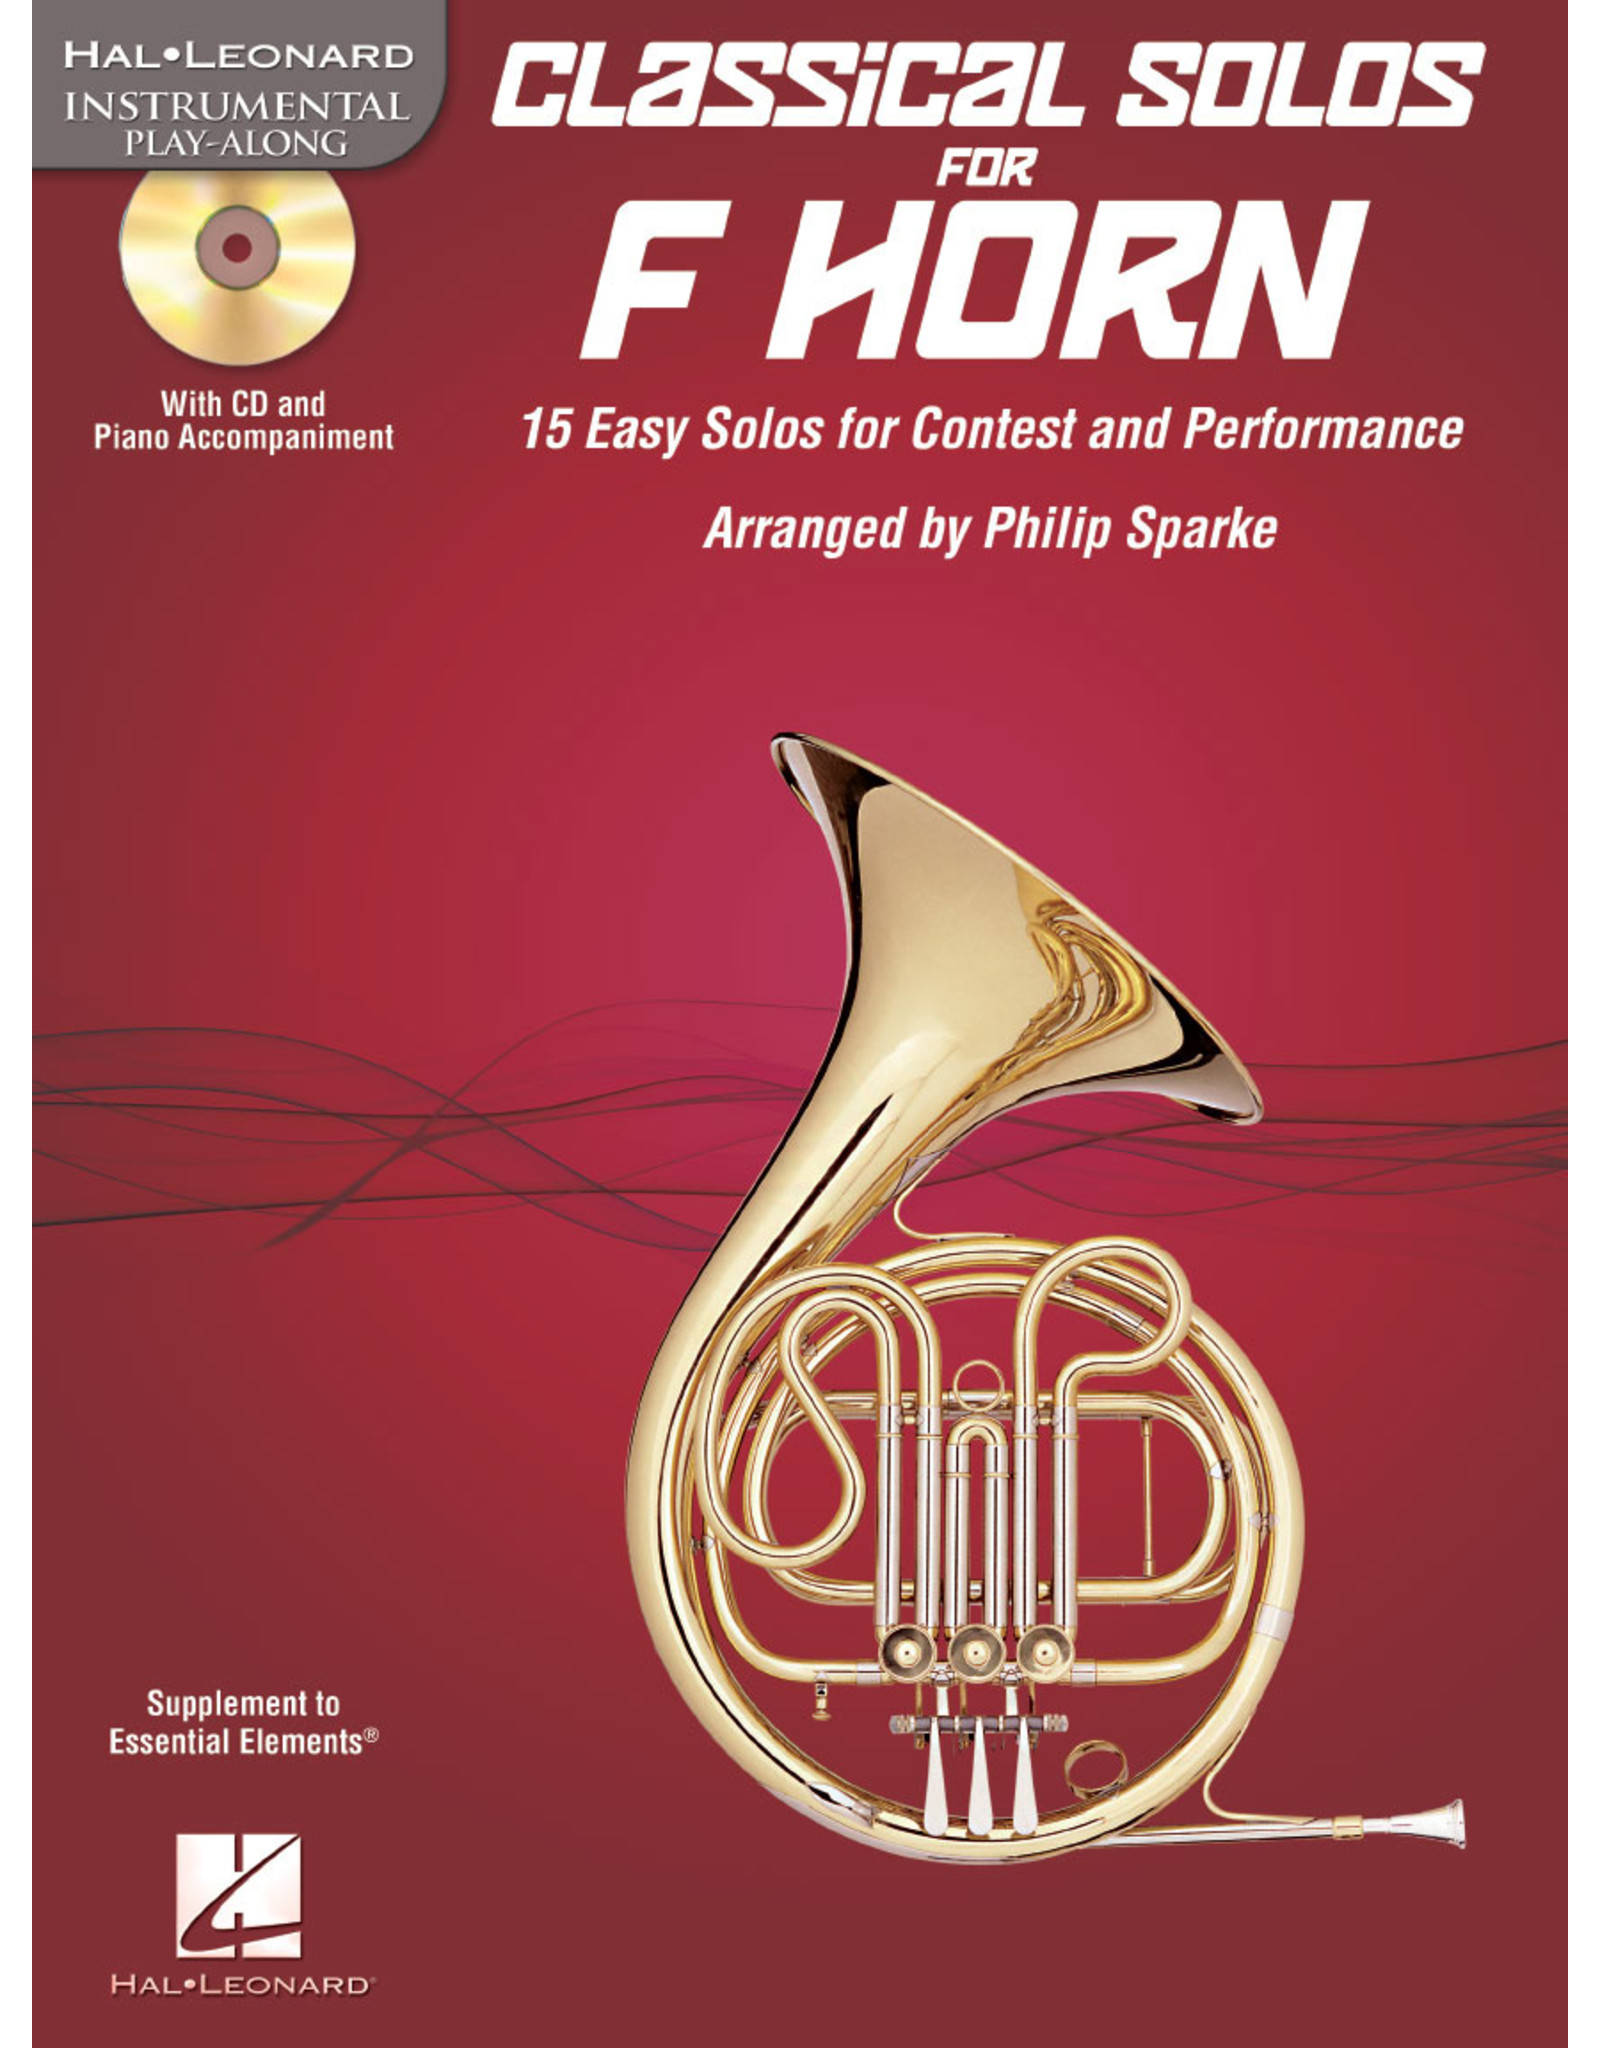 Hal Leonard Classical Solos for Horn 15 Easy Solos for Contest and Performance arr. Philip Sparke Instrumental Play-Along